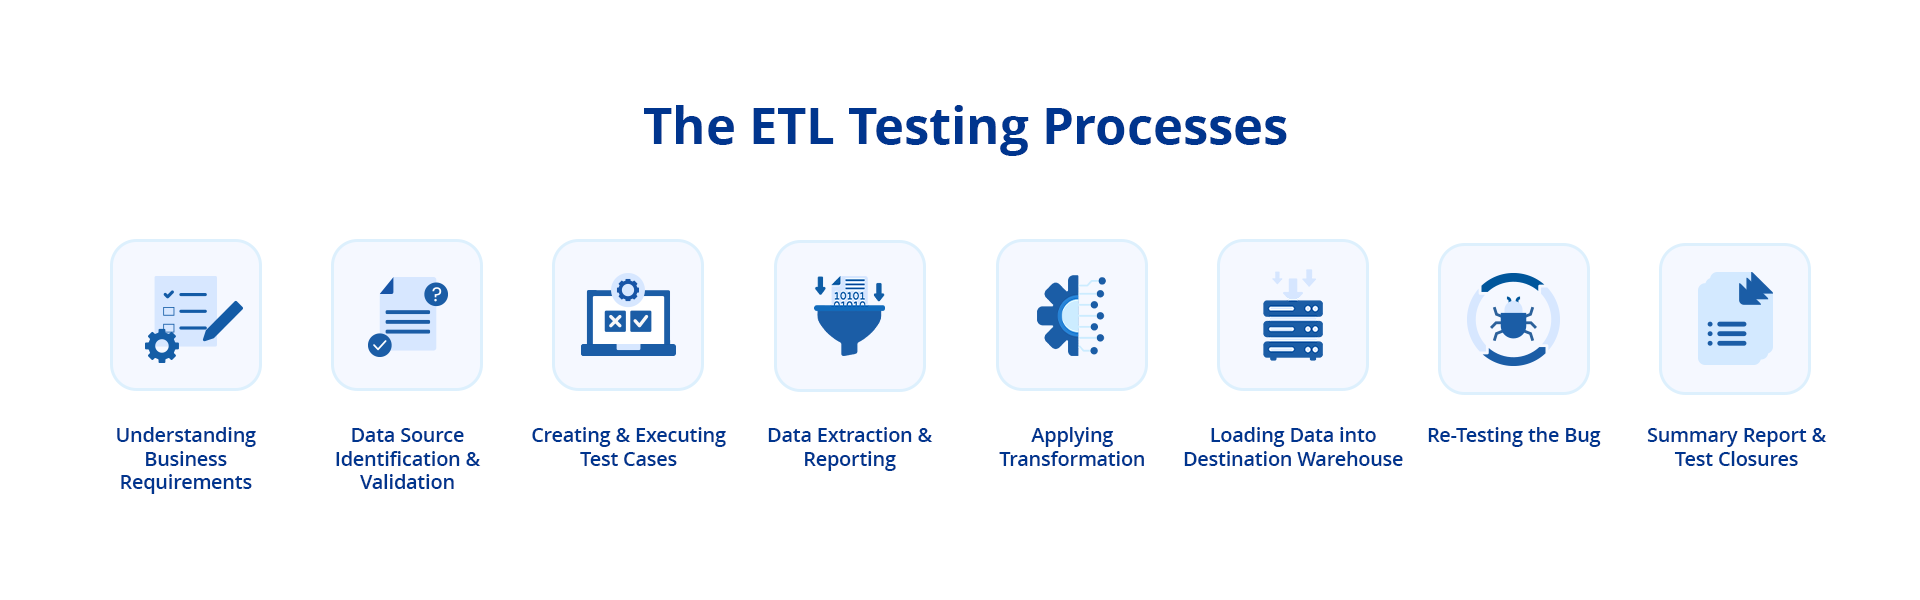 A graphic highlighting the steps in the ETL testing process.